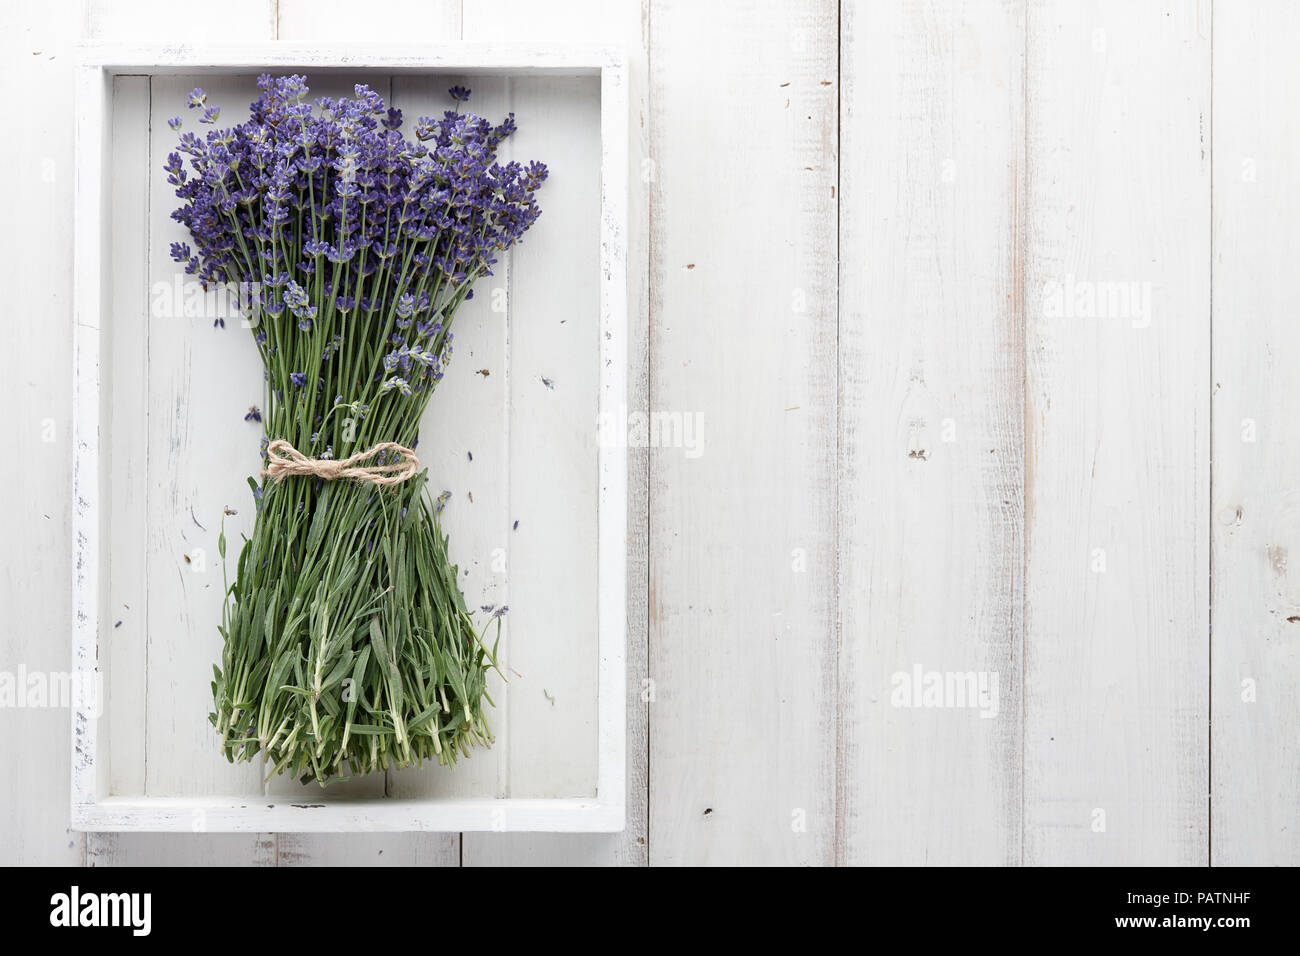 Lavender flowers bouquet on white wooden planks Stock Photo